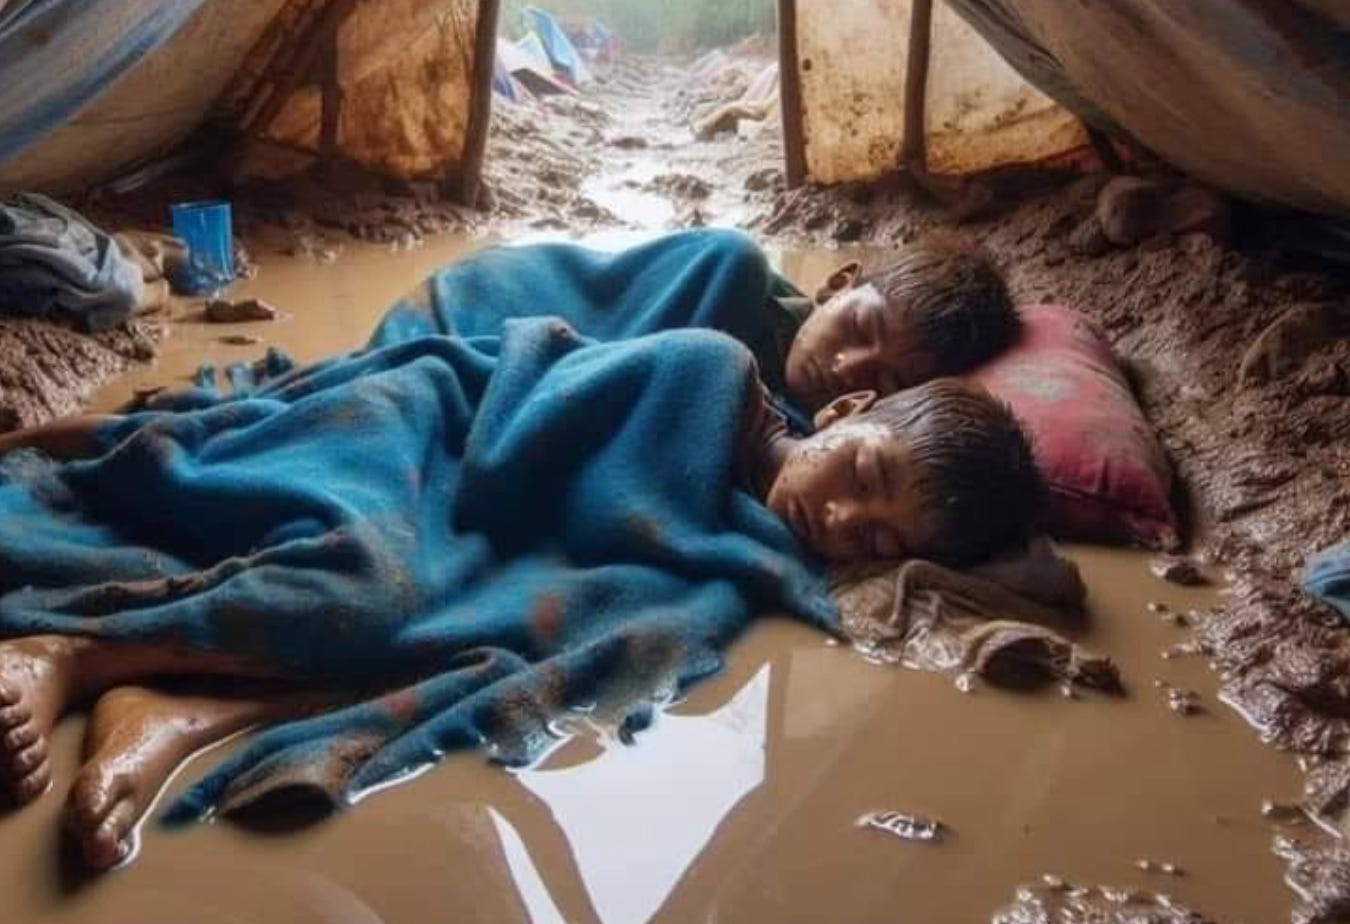 Some kids pictured lying in mud